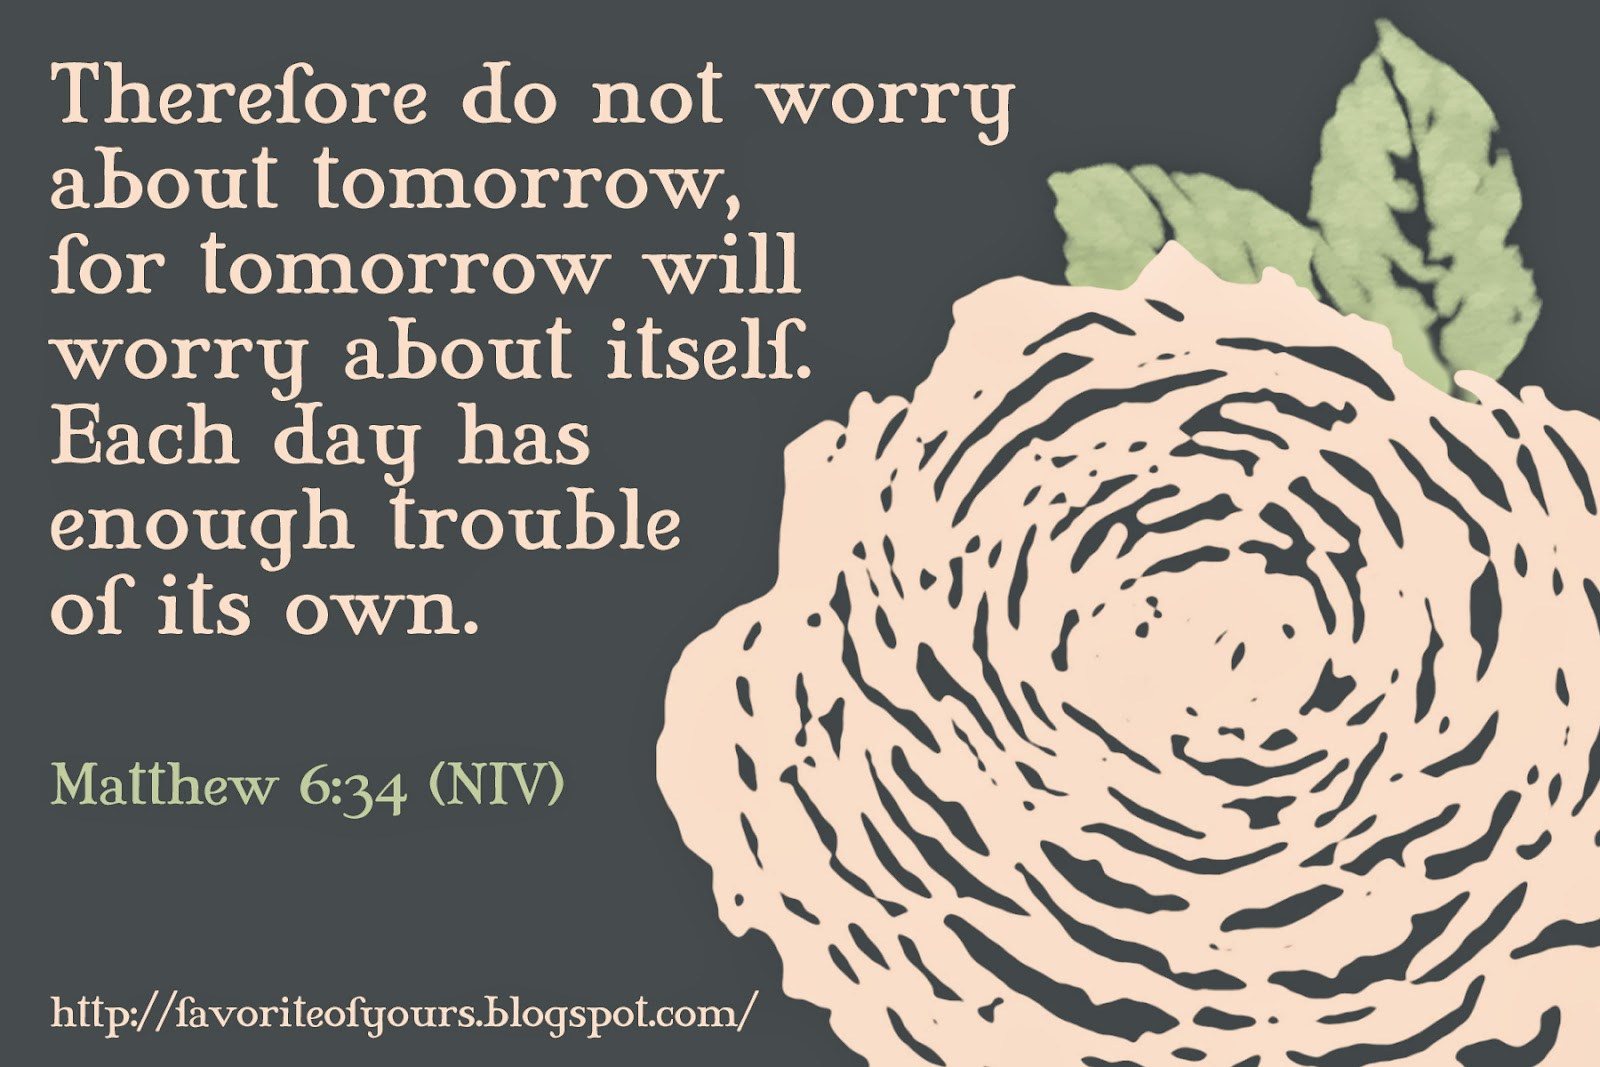 Favorite of Yours: do not worry about tomorrow,Matthew 6:34